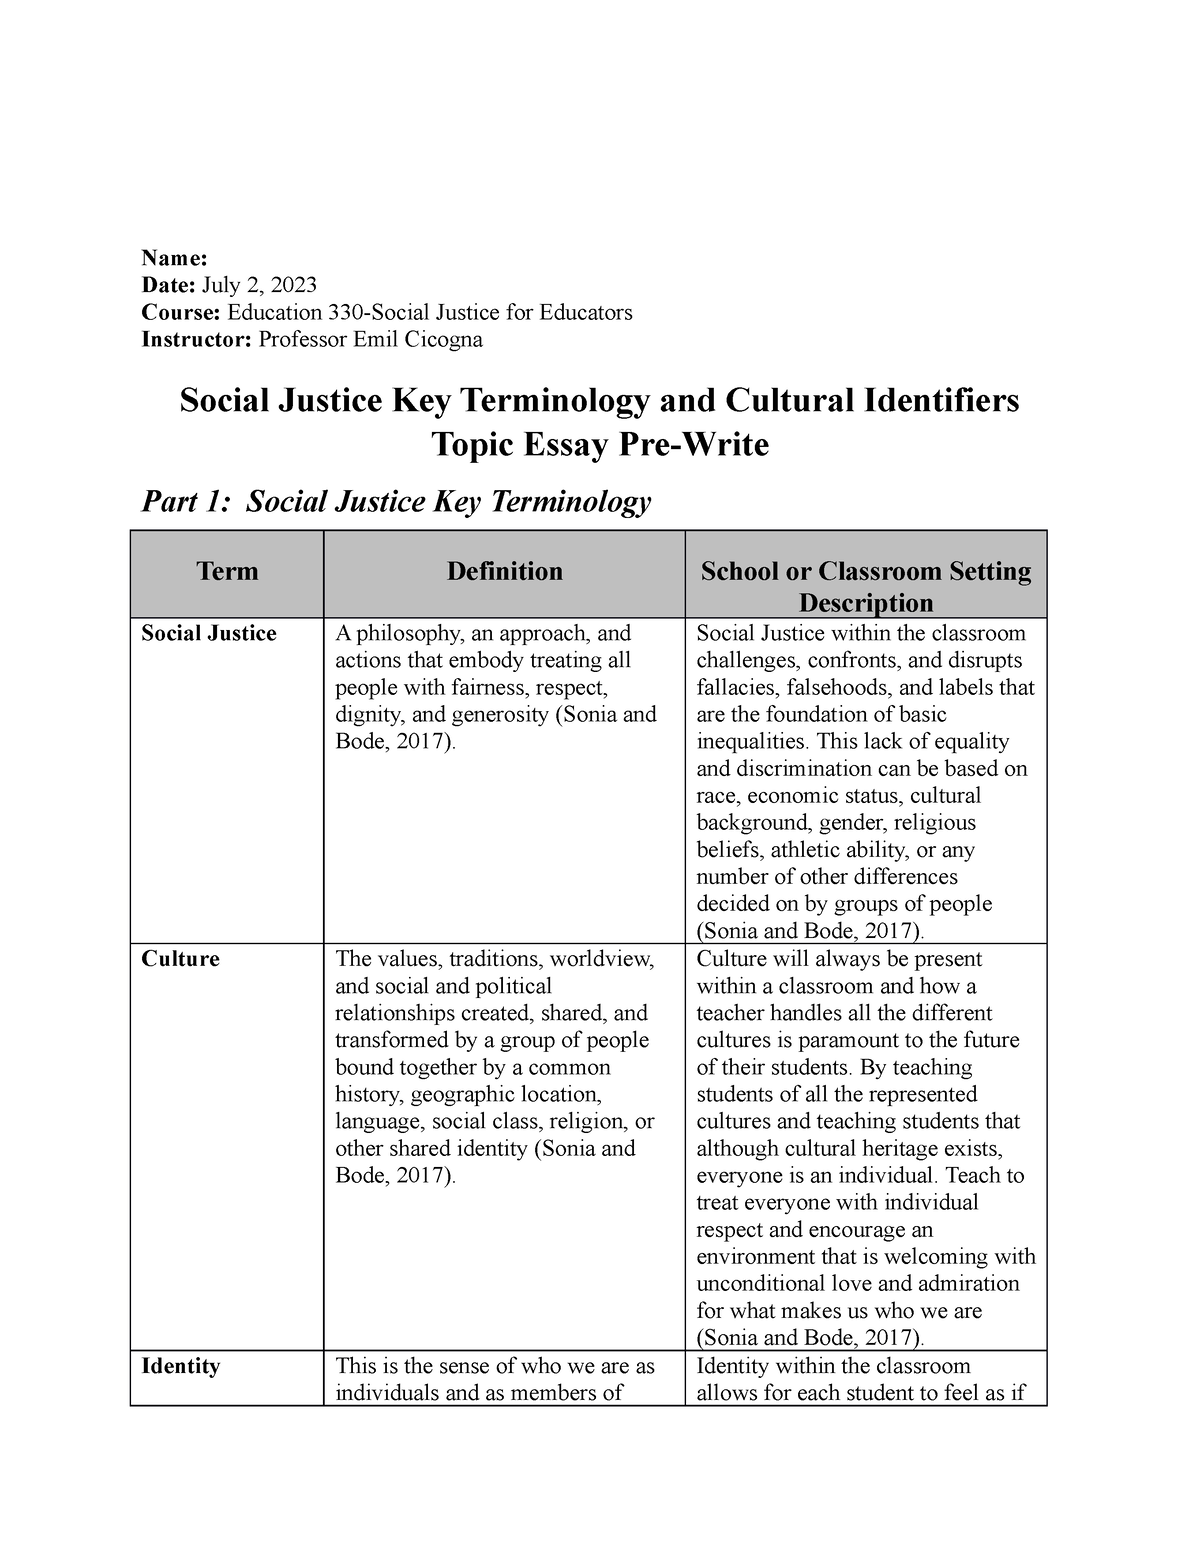 social injustice and cultural identifiers research essay